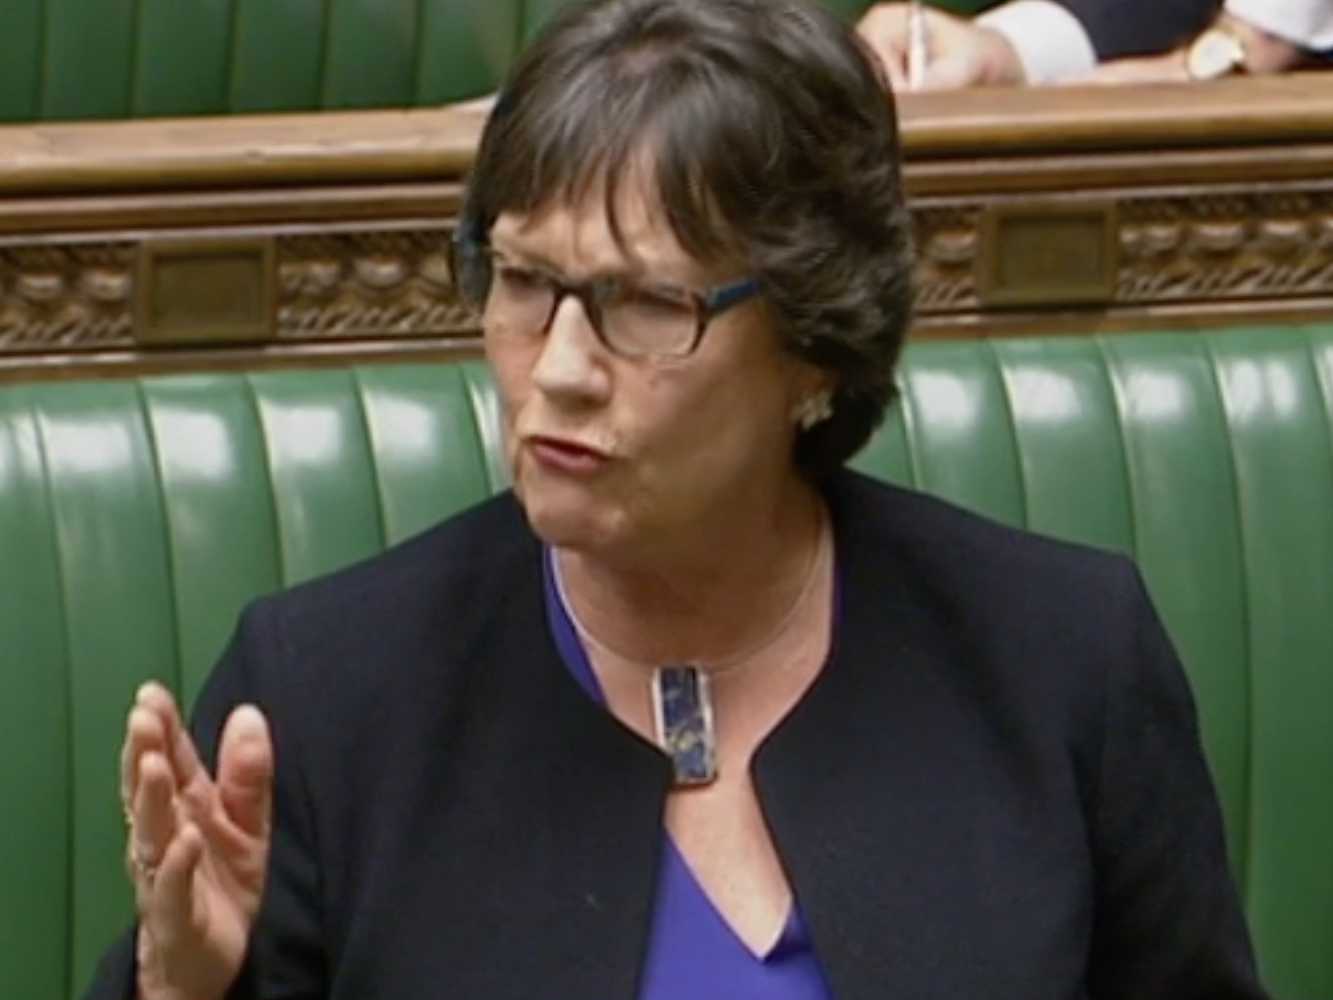 Pauline Latham, Conservative, argues to raise the minimum age of marriage to 18